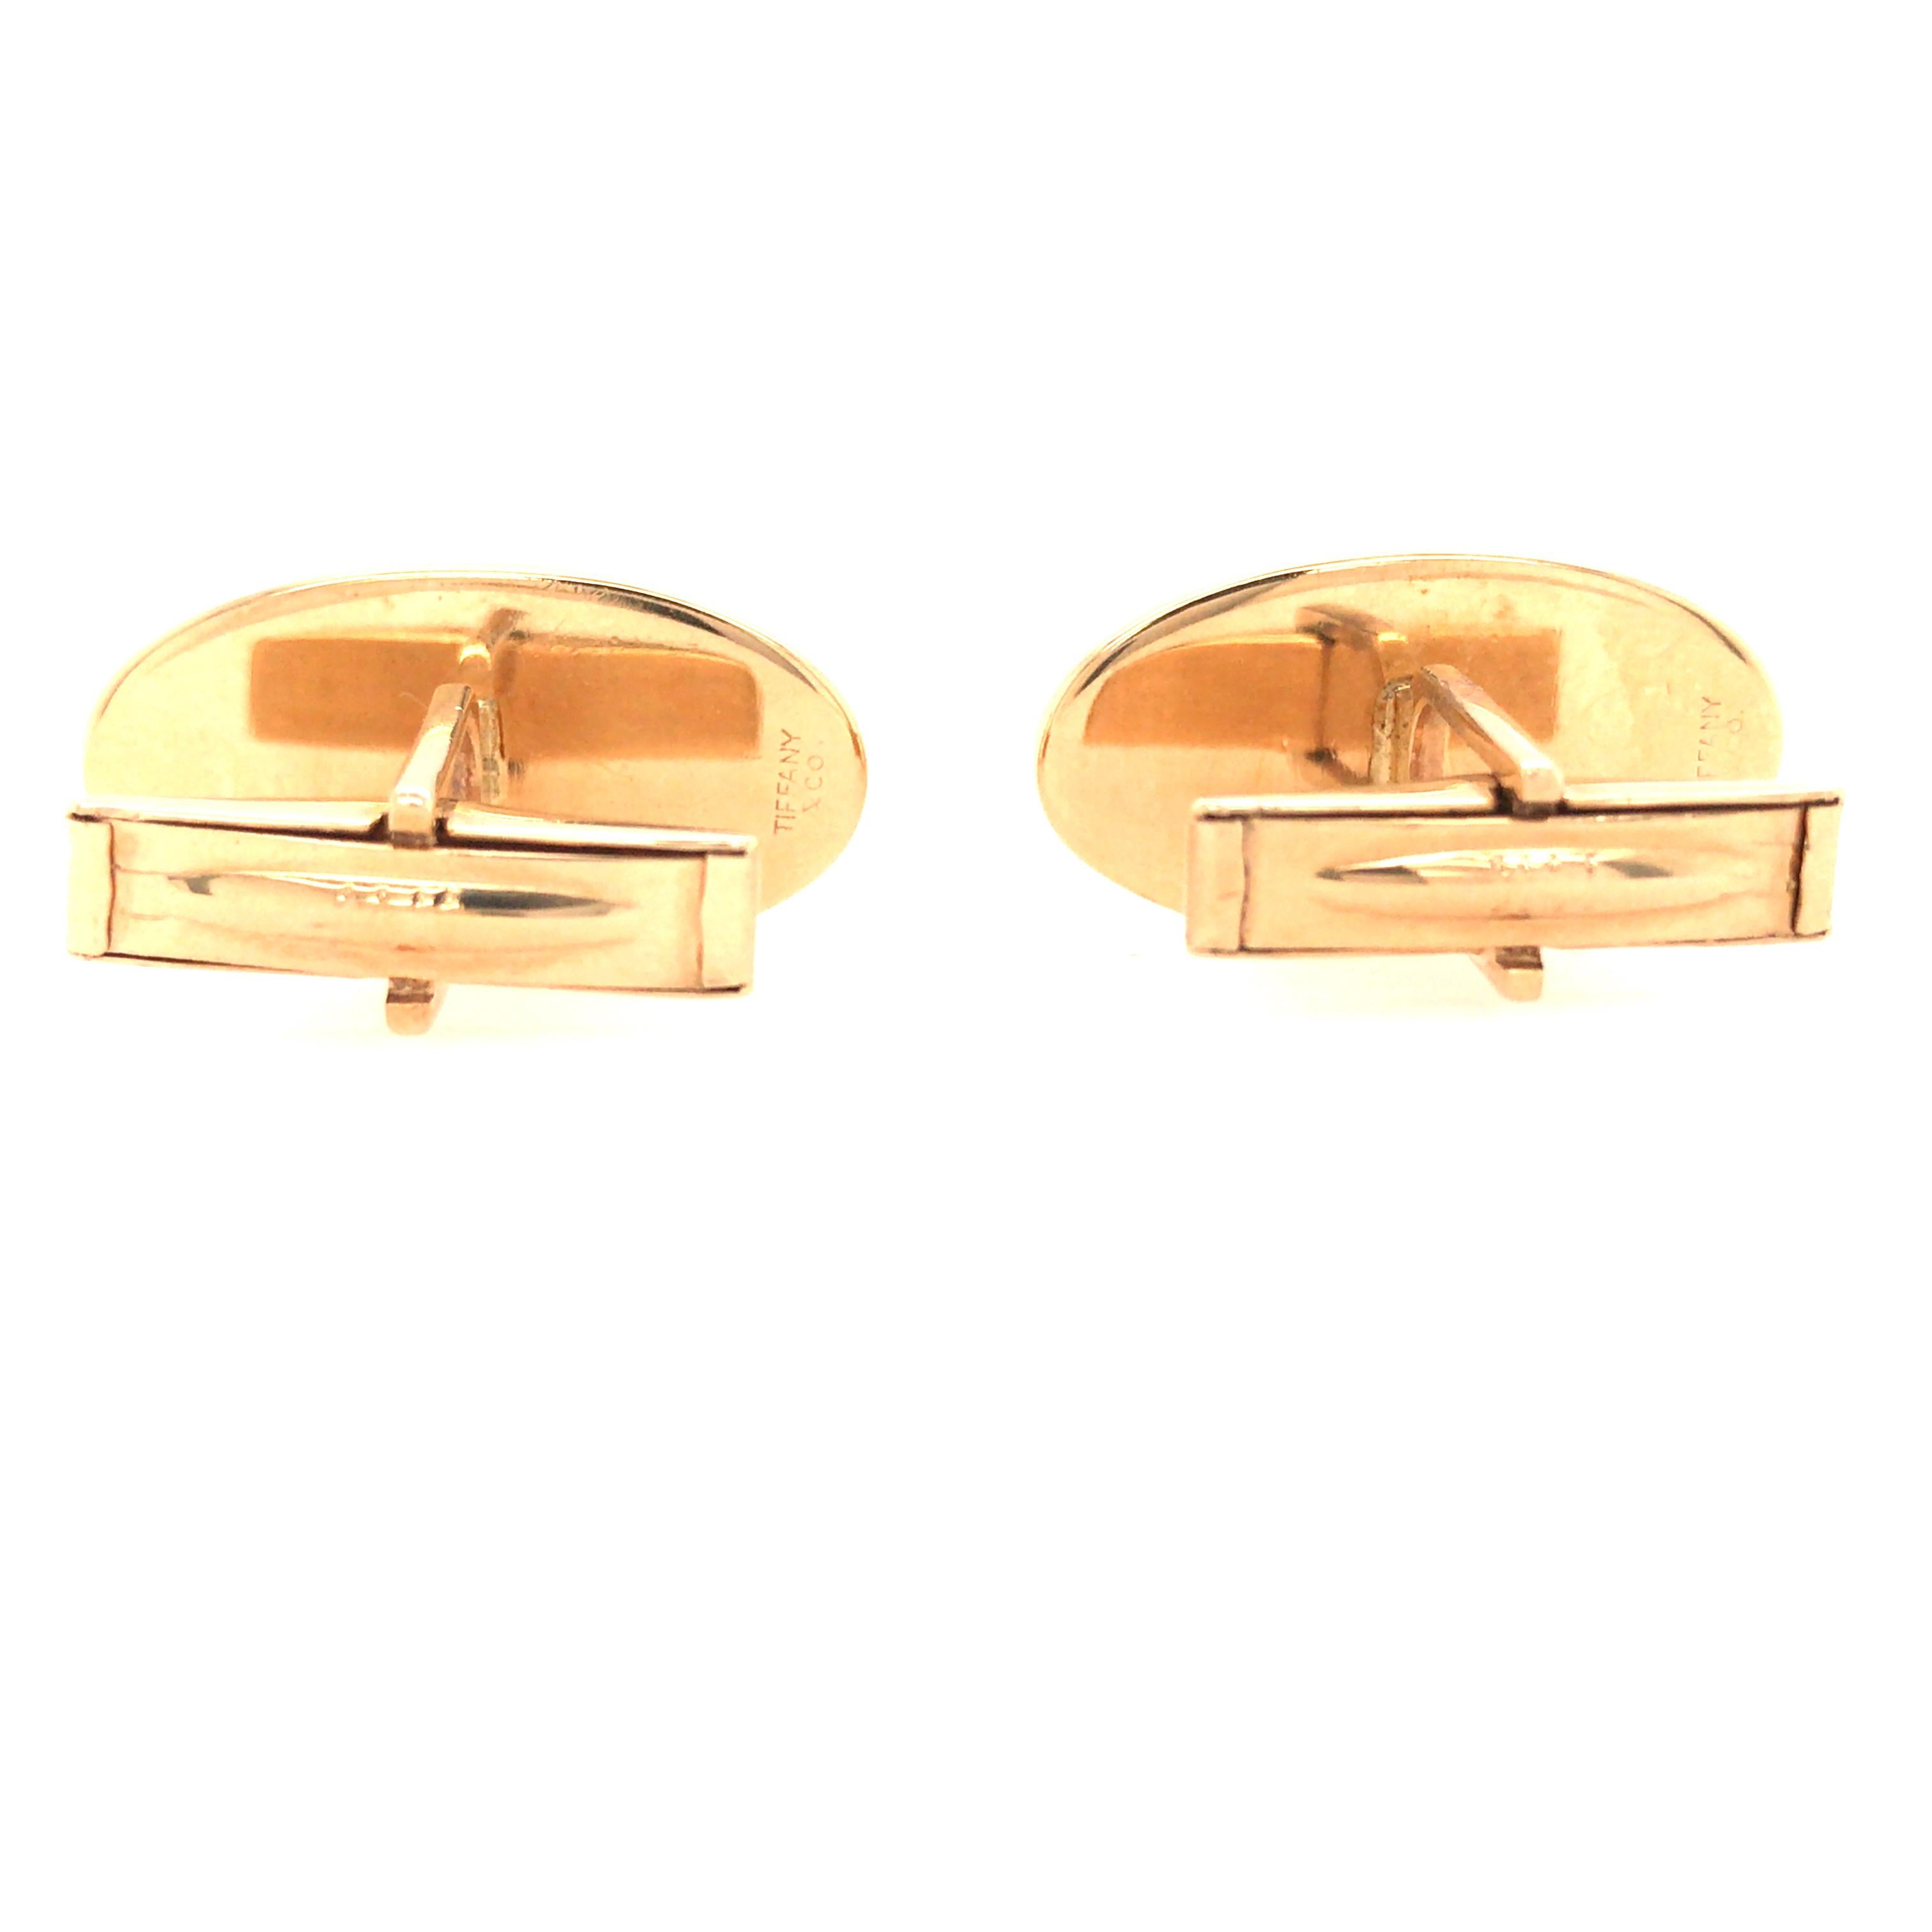 Tiffany & Co classic Oval Cufflinks in 14K Yellow Gold.  1 inch in width.  21.6 grams. Signed.